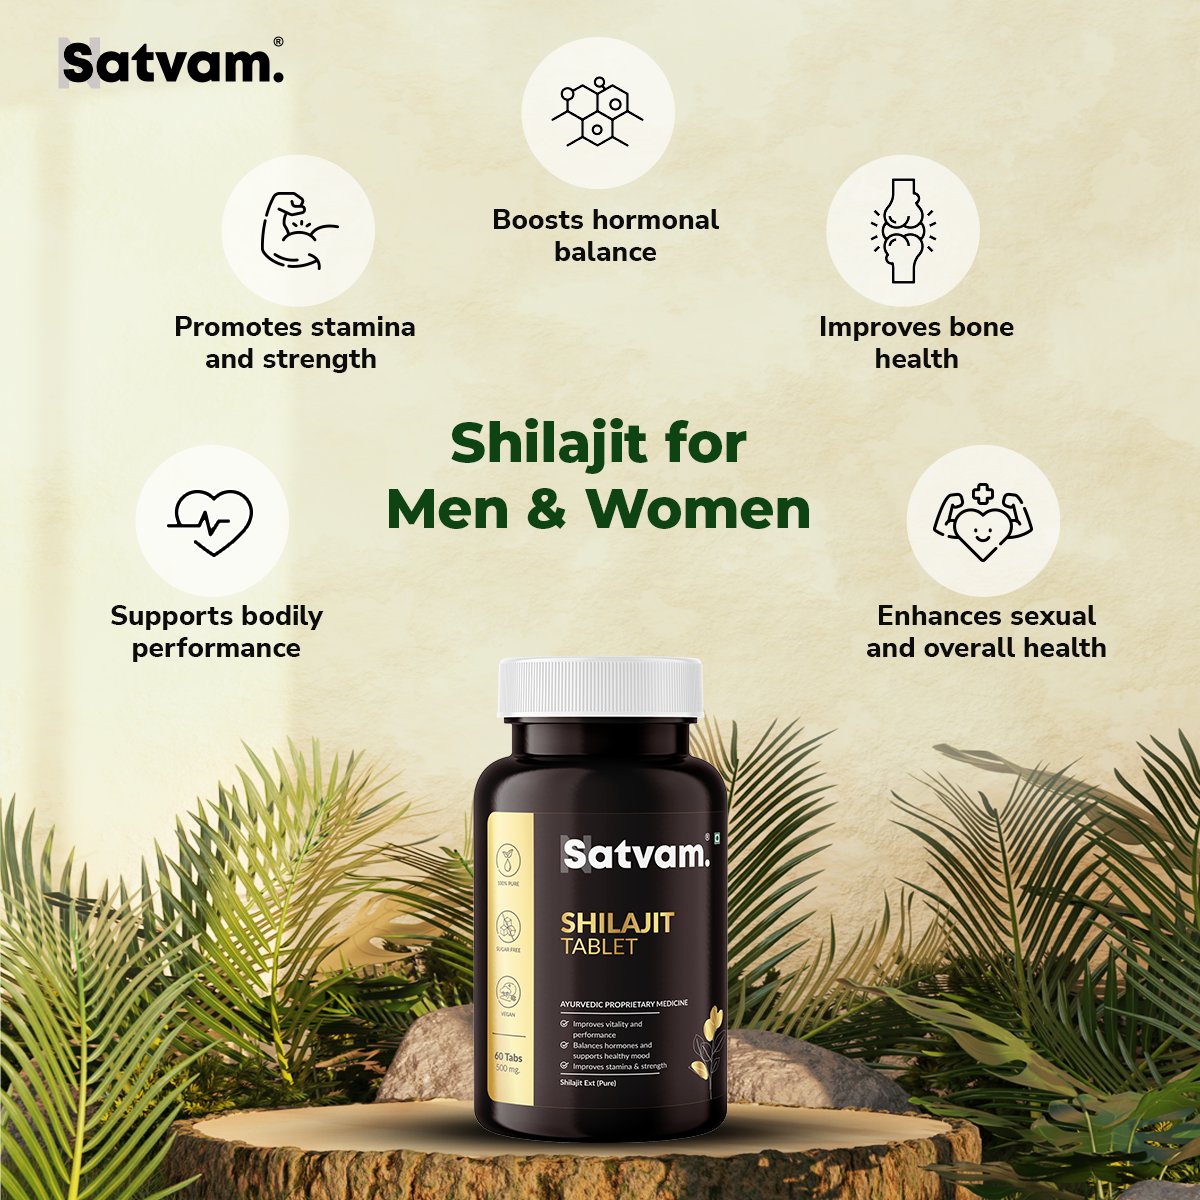 Unlock the goodness of nature's rare minerals from pure, potent Shilajit. Shop now to improve overall wellness and strength.

#shilajit #shilajitformen #shilajitforwomen #pureshilajit #shilajitsupplement #naturalshilajit #vegan #veganhealthsupplements #healthsupplements